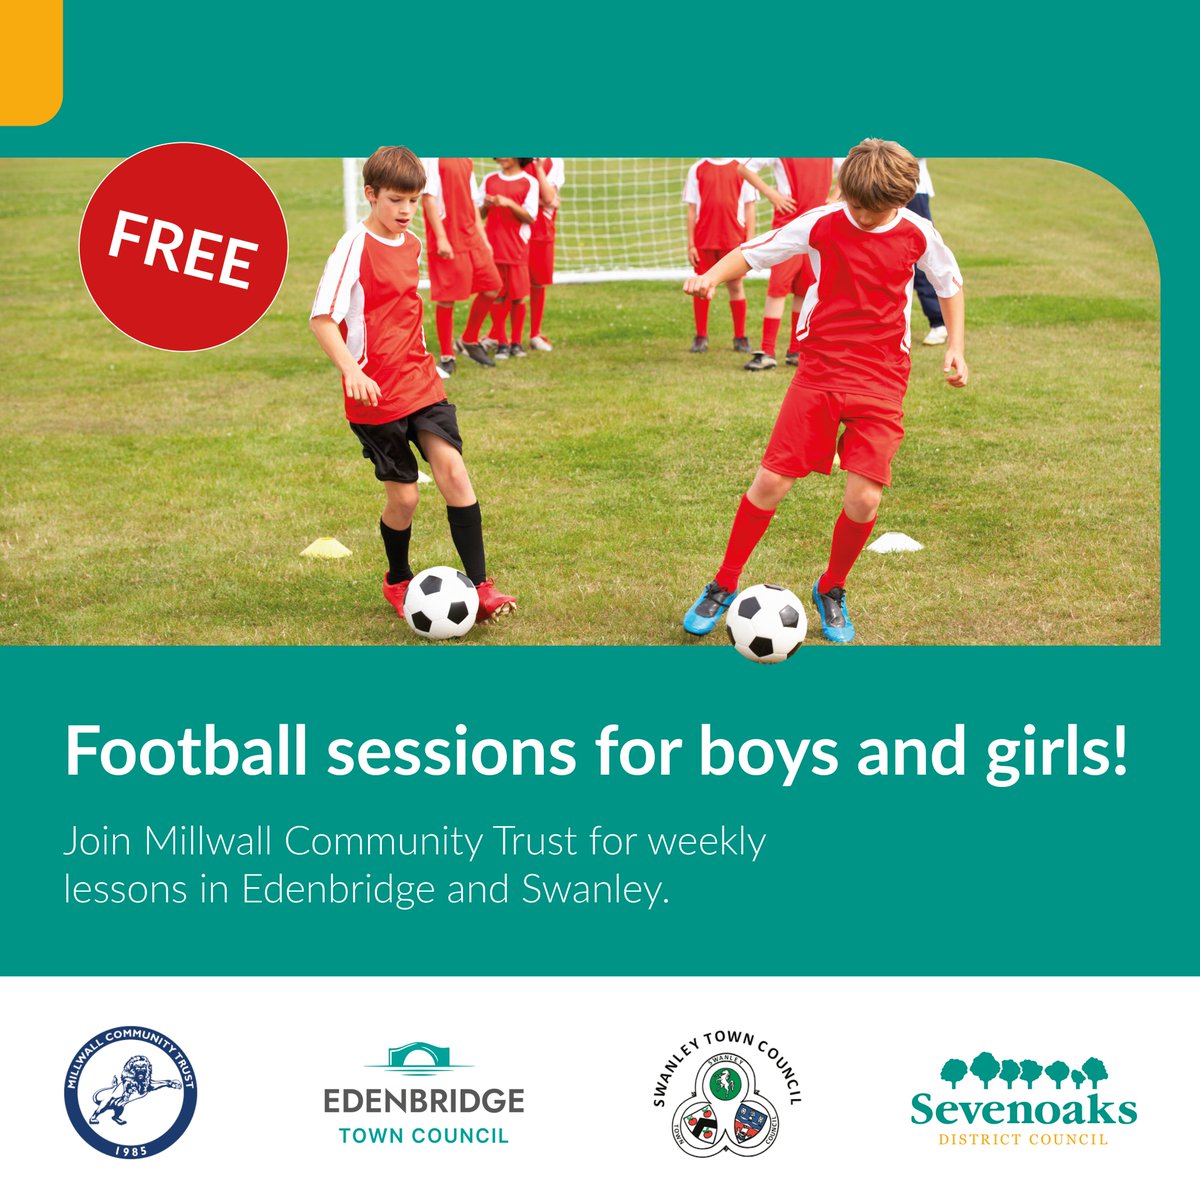 Don’t miss our #FREE weekly football sessions for boys & girls aged 8-16 in #Edenbridge & #Swanley with @Millwall_MCT! All abilities are welcome and there is no booking required. Find out more including start & times here - sevenoaks.gov.uk/kidsfootball